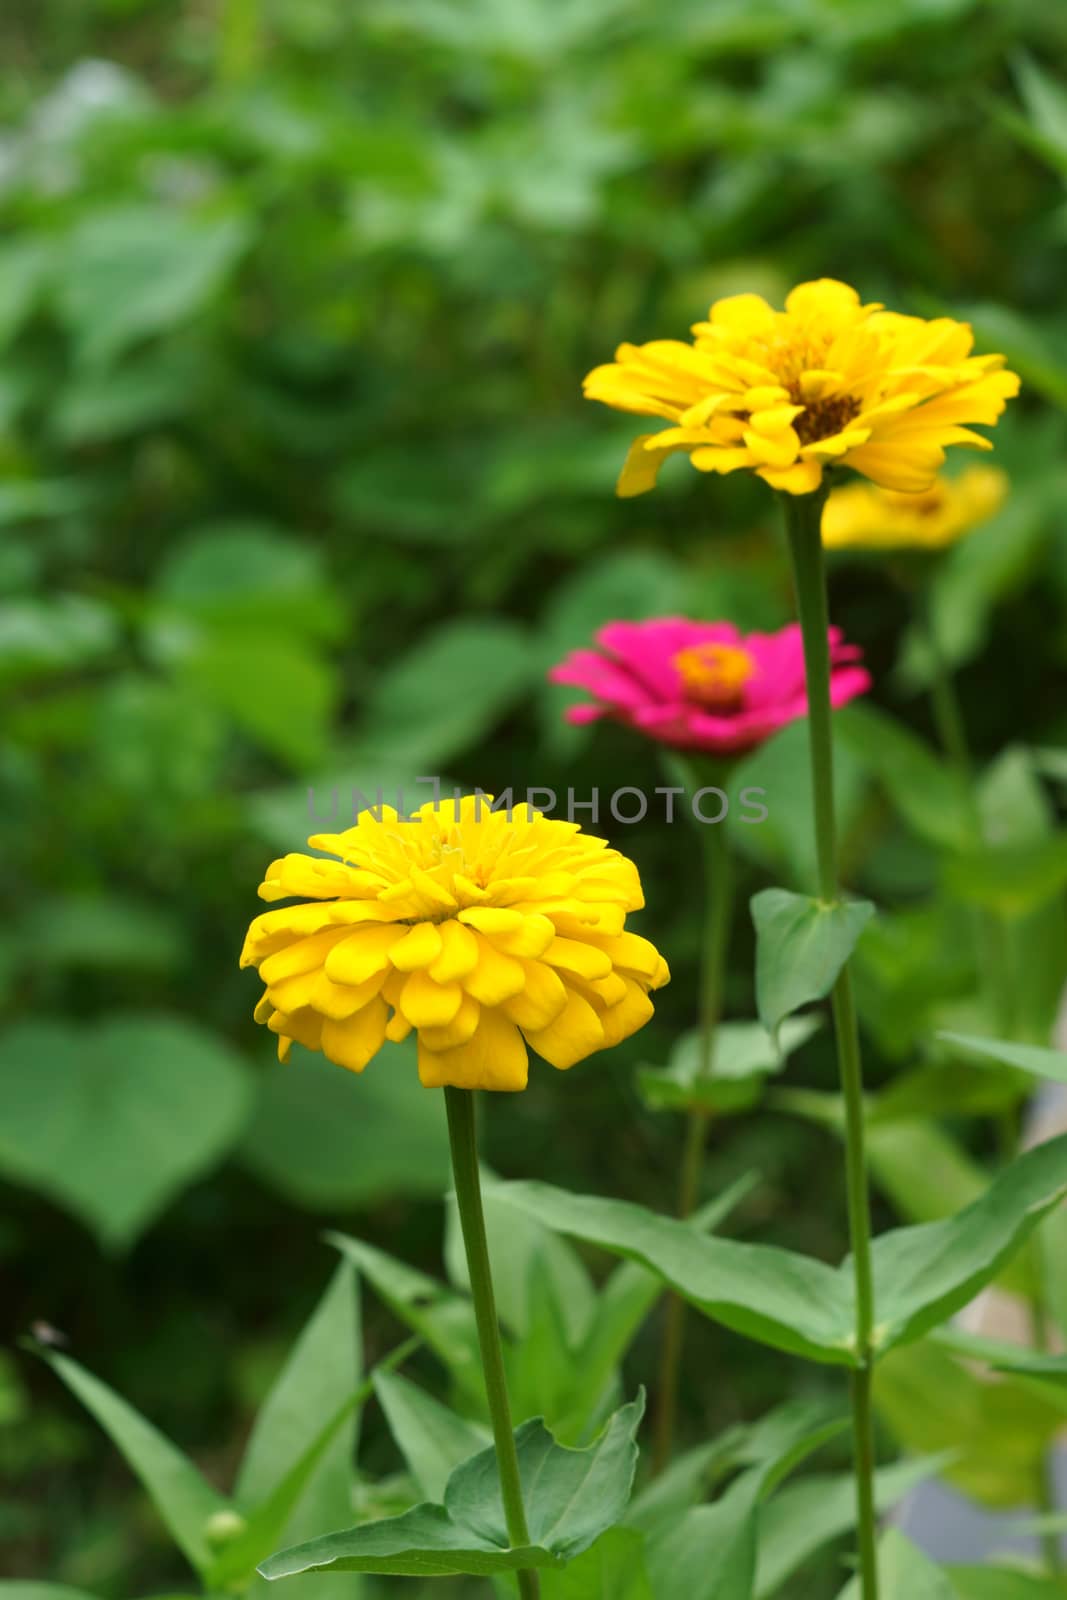 Zinnia flowers. (family Compositae) by Noppharat_th